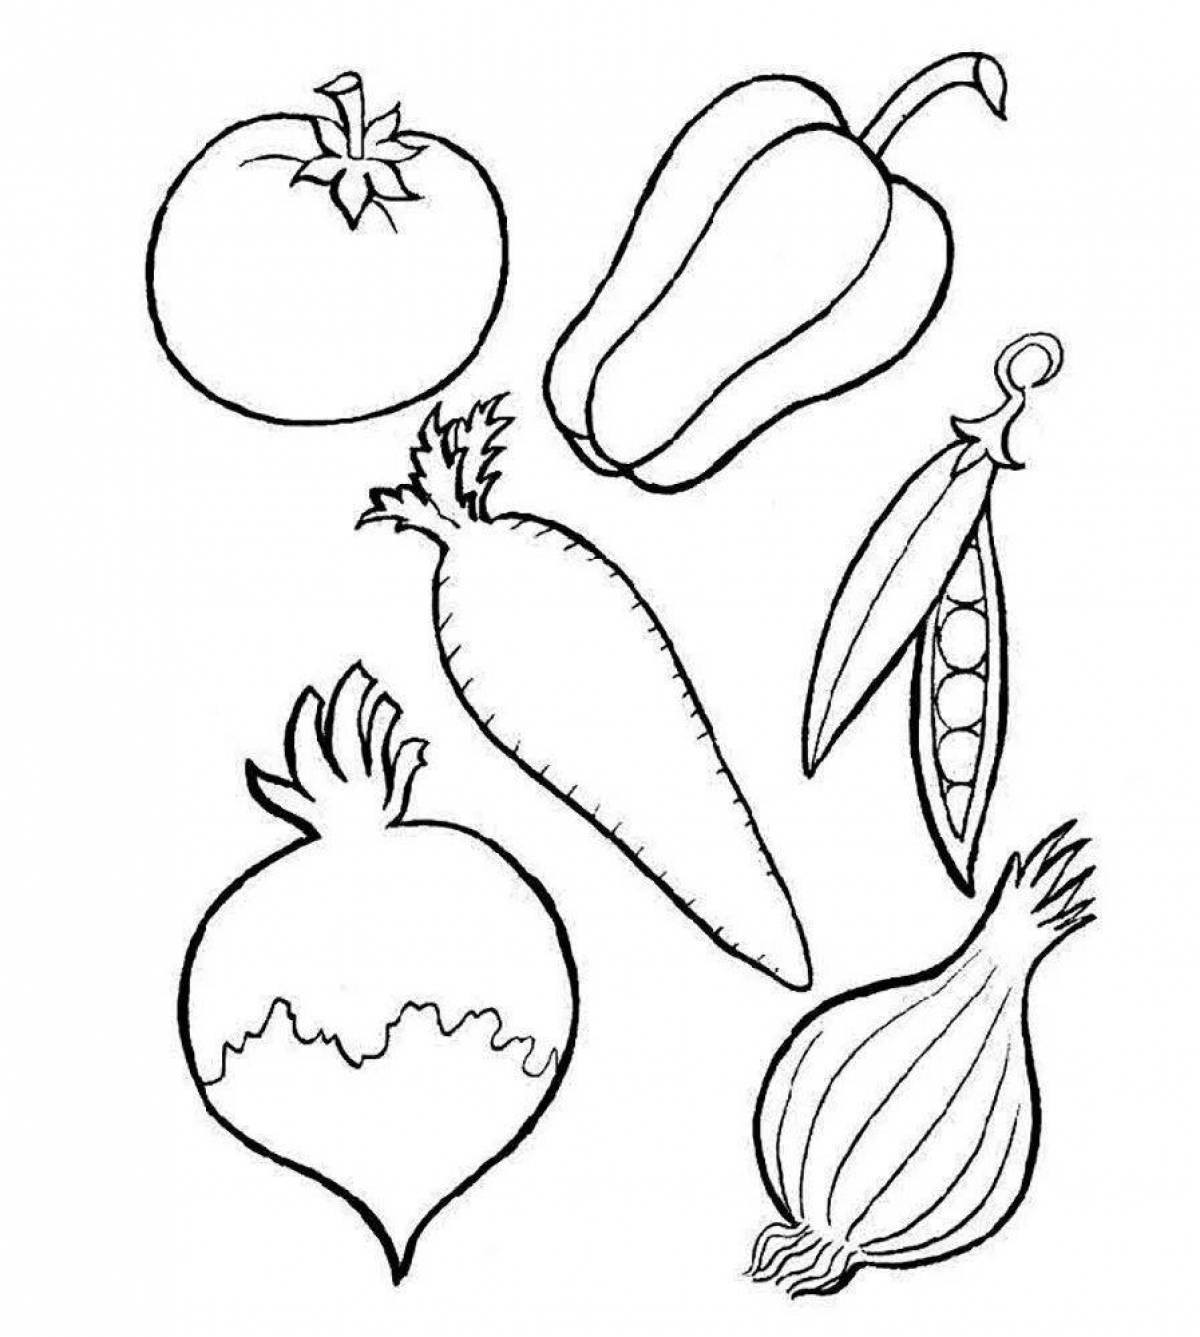 Very colorful vegetable and fruit coloring pages for kids